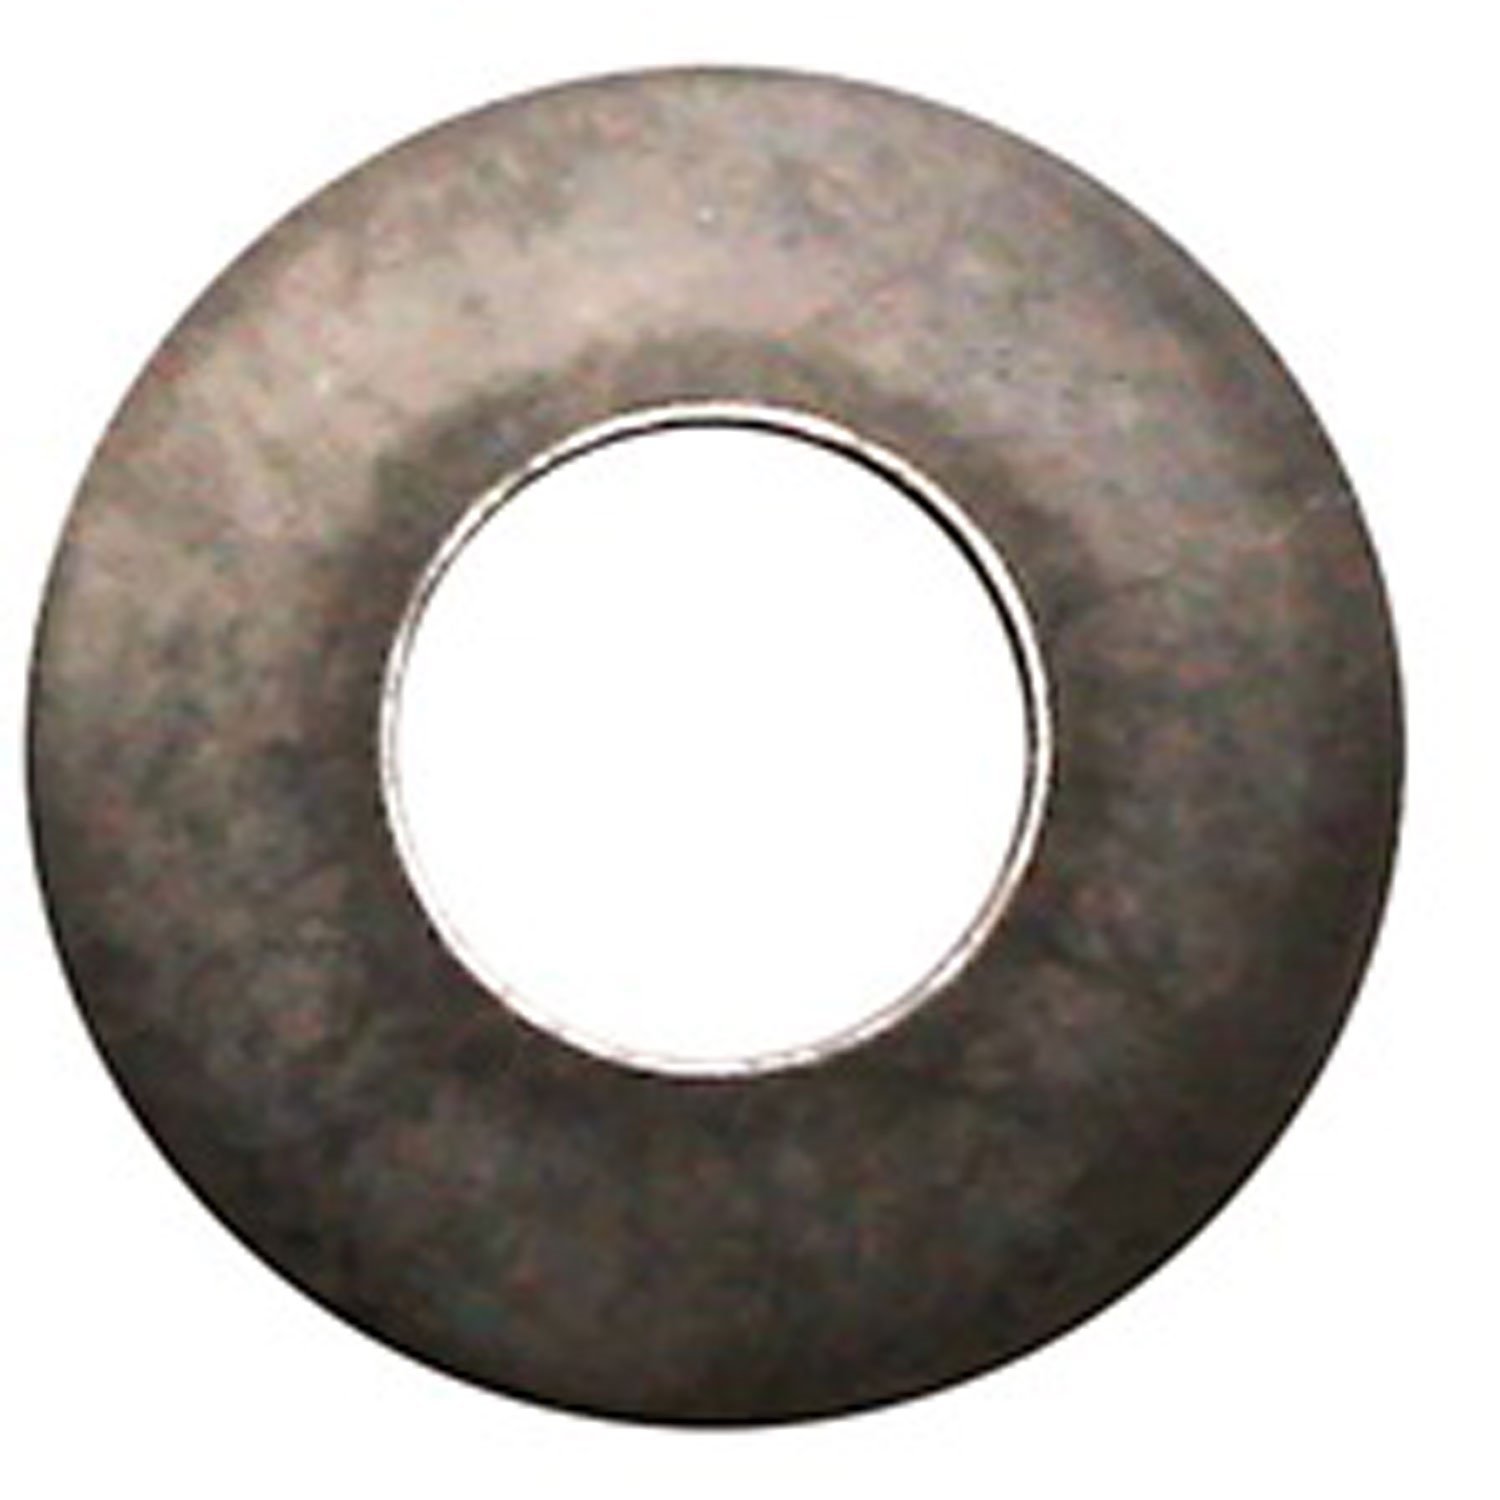 Pinion Thrust Washer for Dana 30 1996-2006 Jeep Wrangler TJ By Omix-ADA